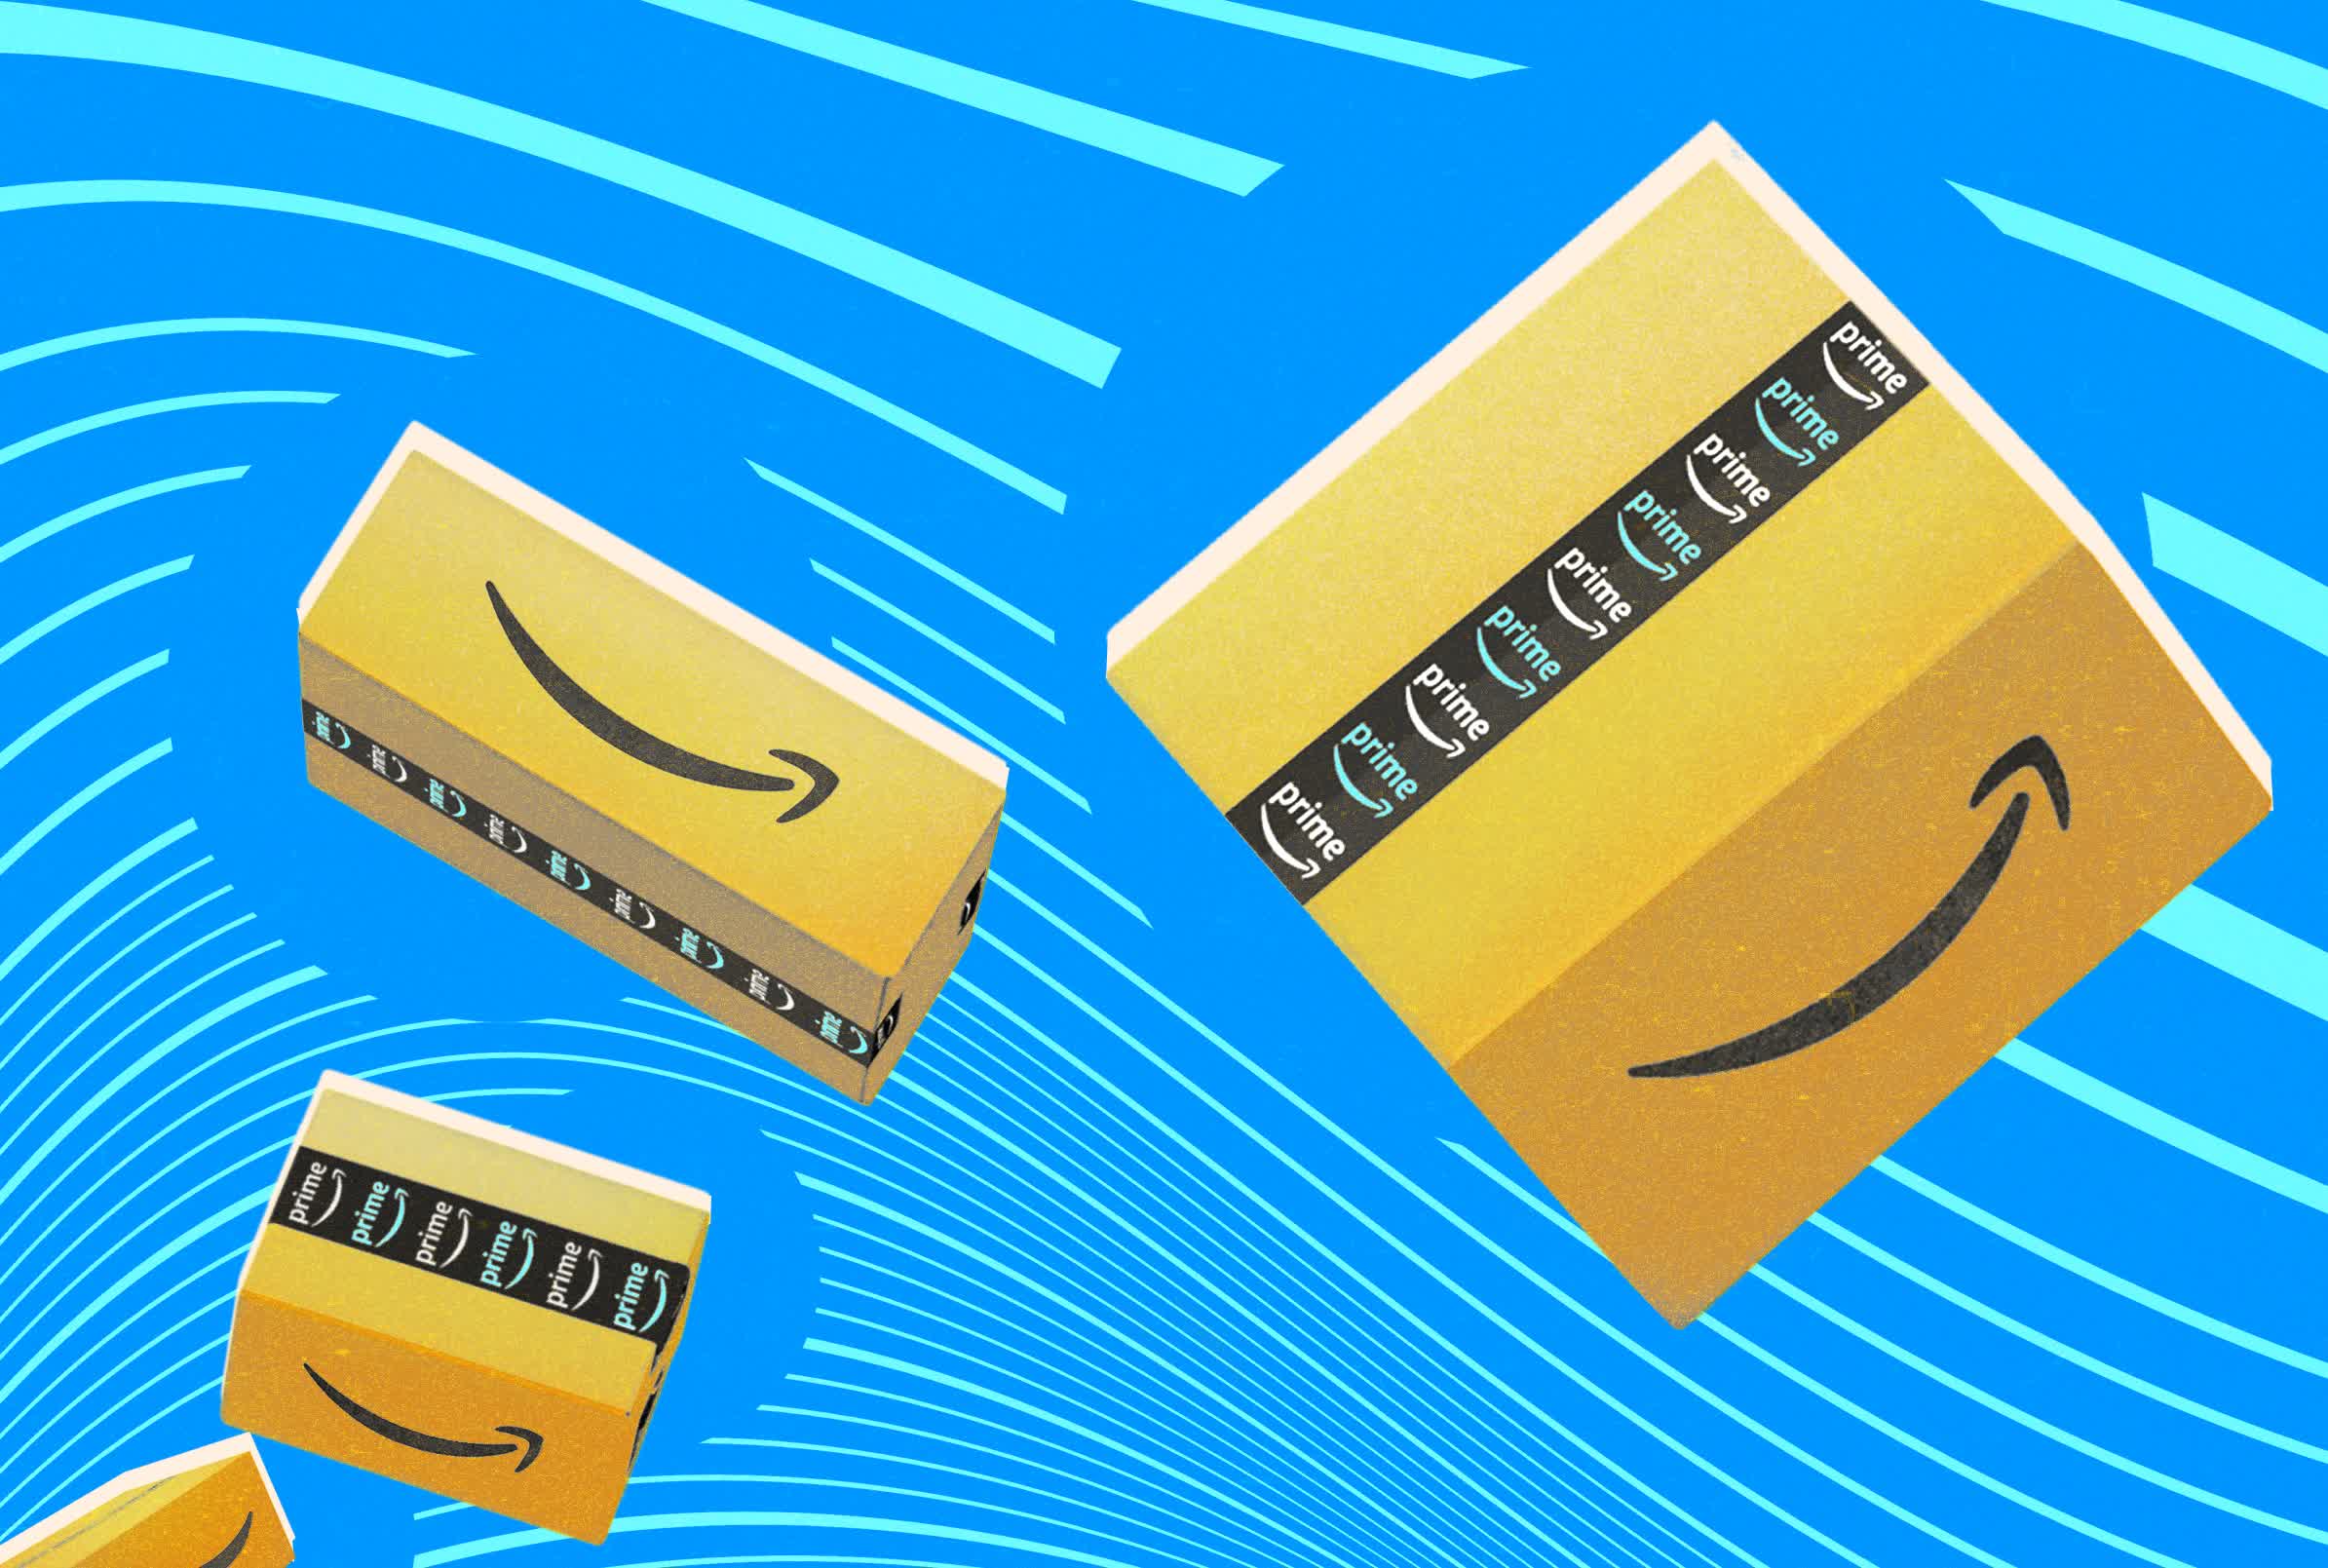 Amazon whets the appetite with early Prime Day deals